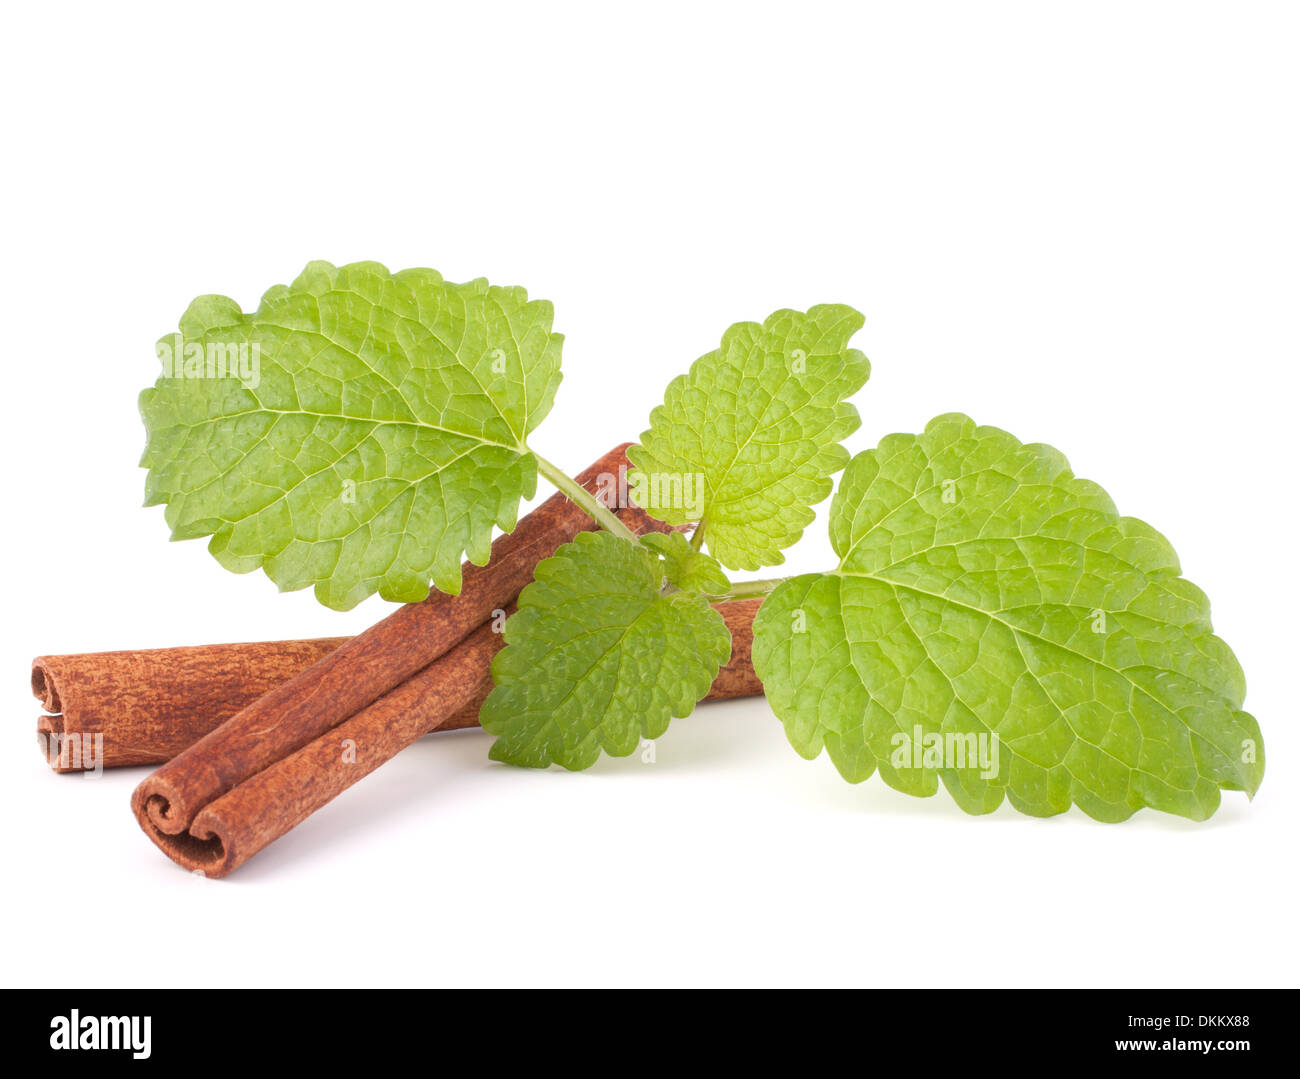 Cinnamon sticks and fresh mint leaf isolated on white background Stock Photo